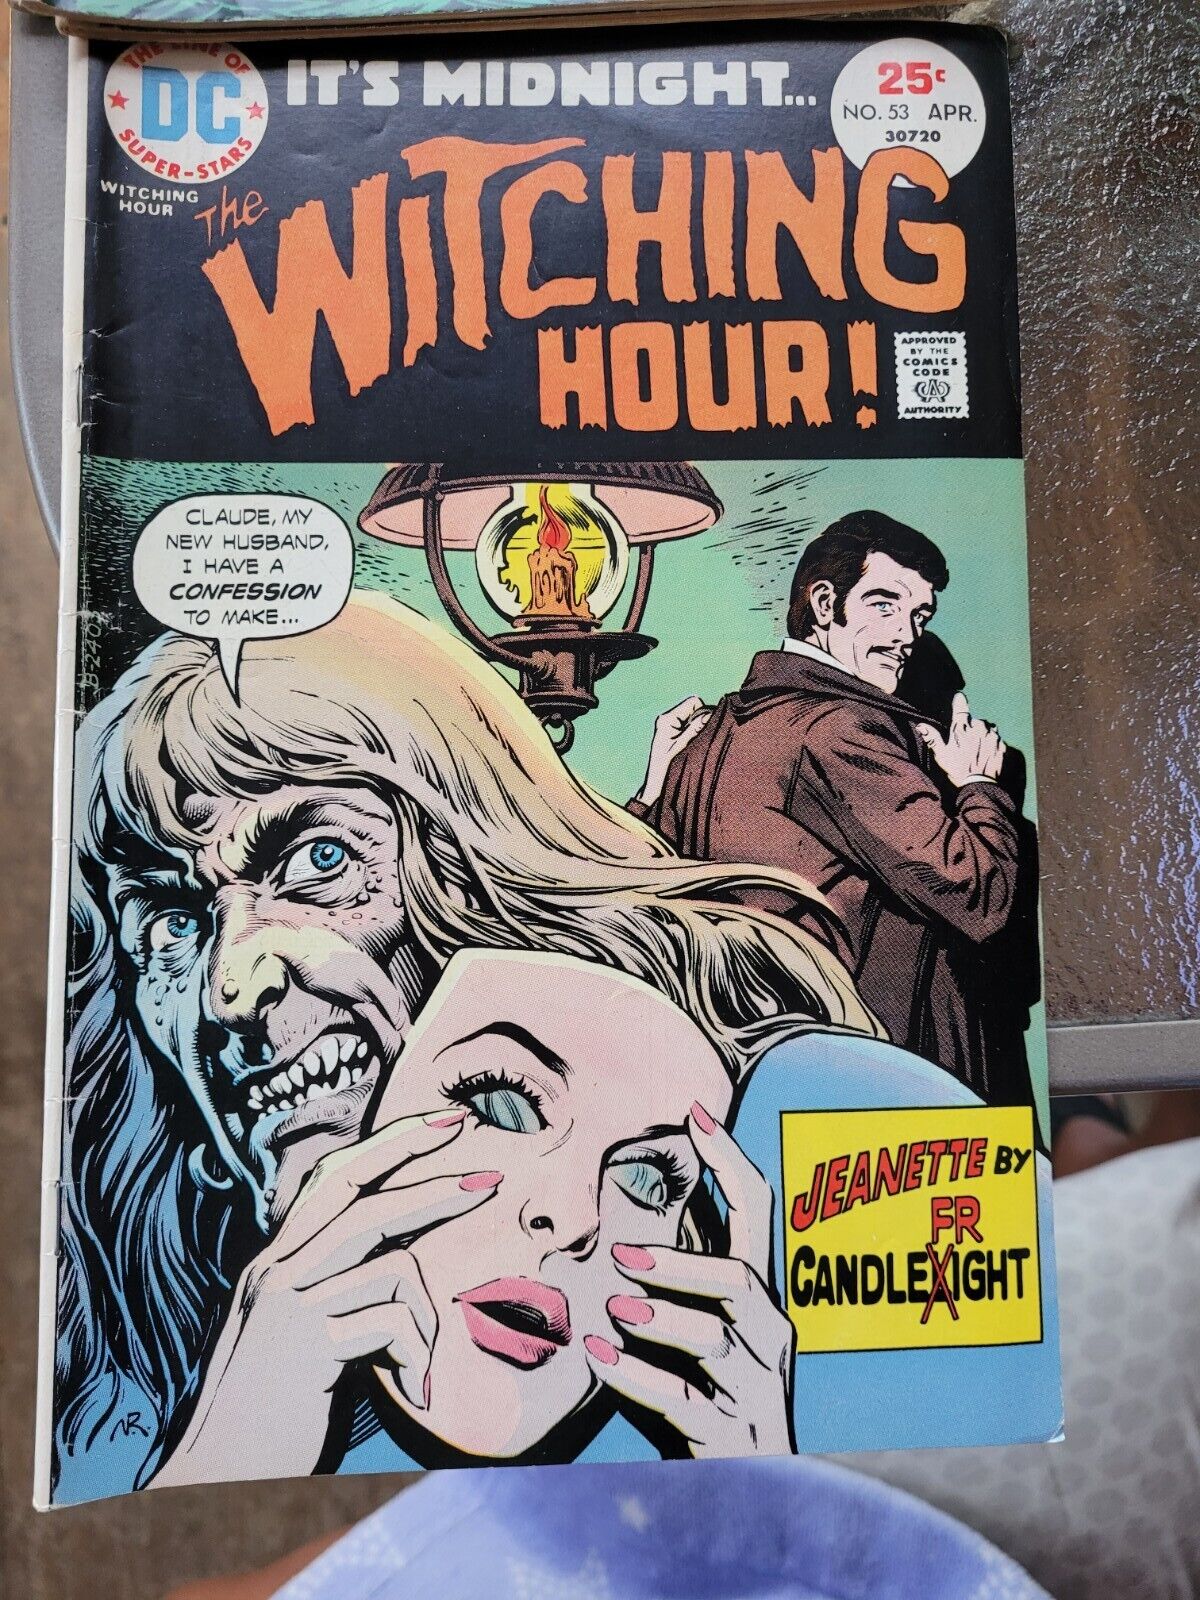 The Witching Hour #53 - DC Comics - 1975